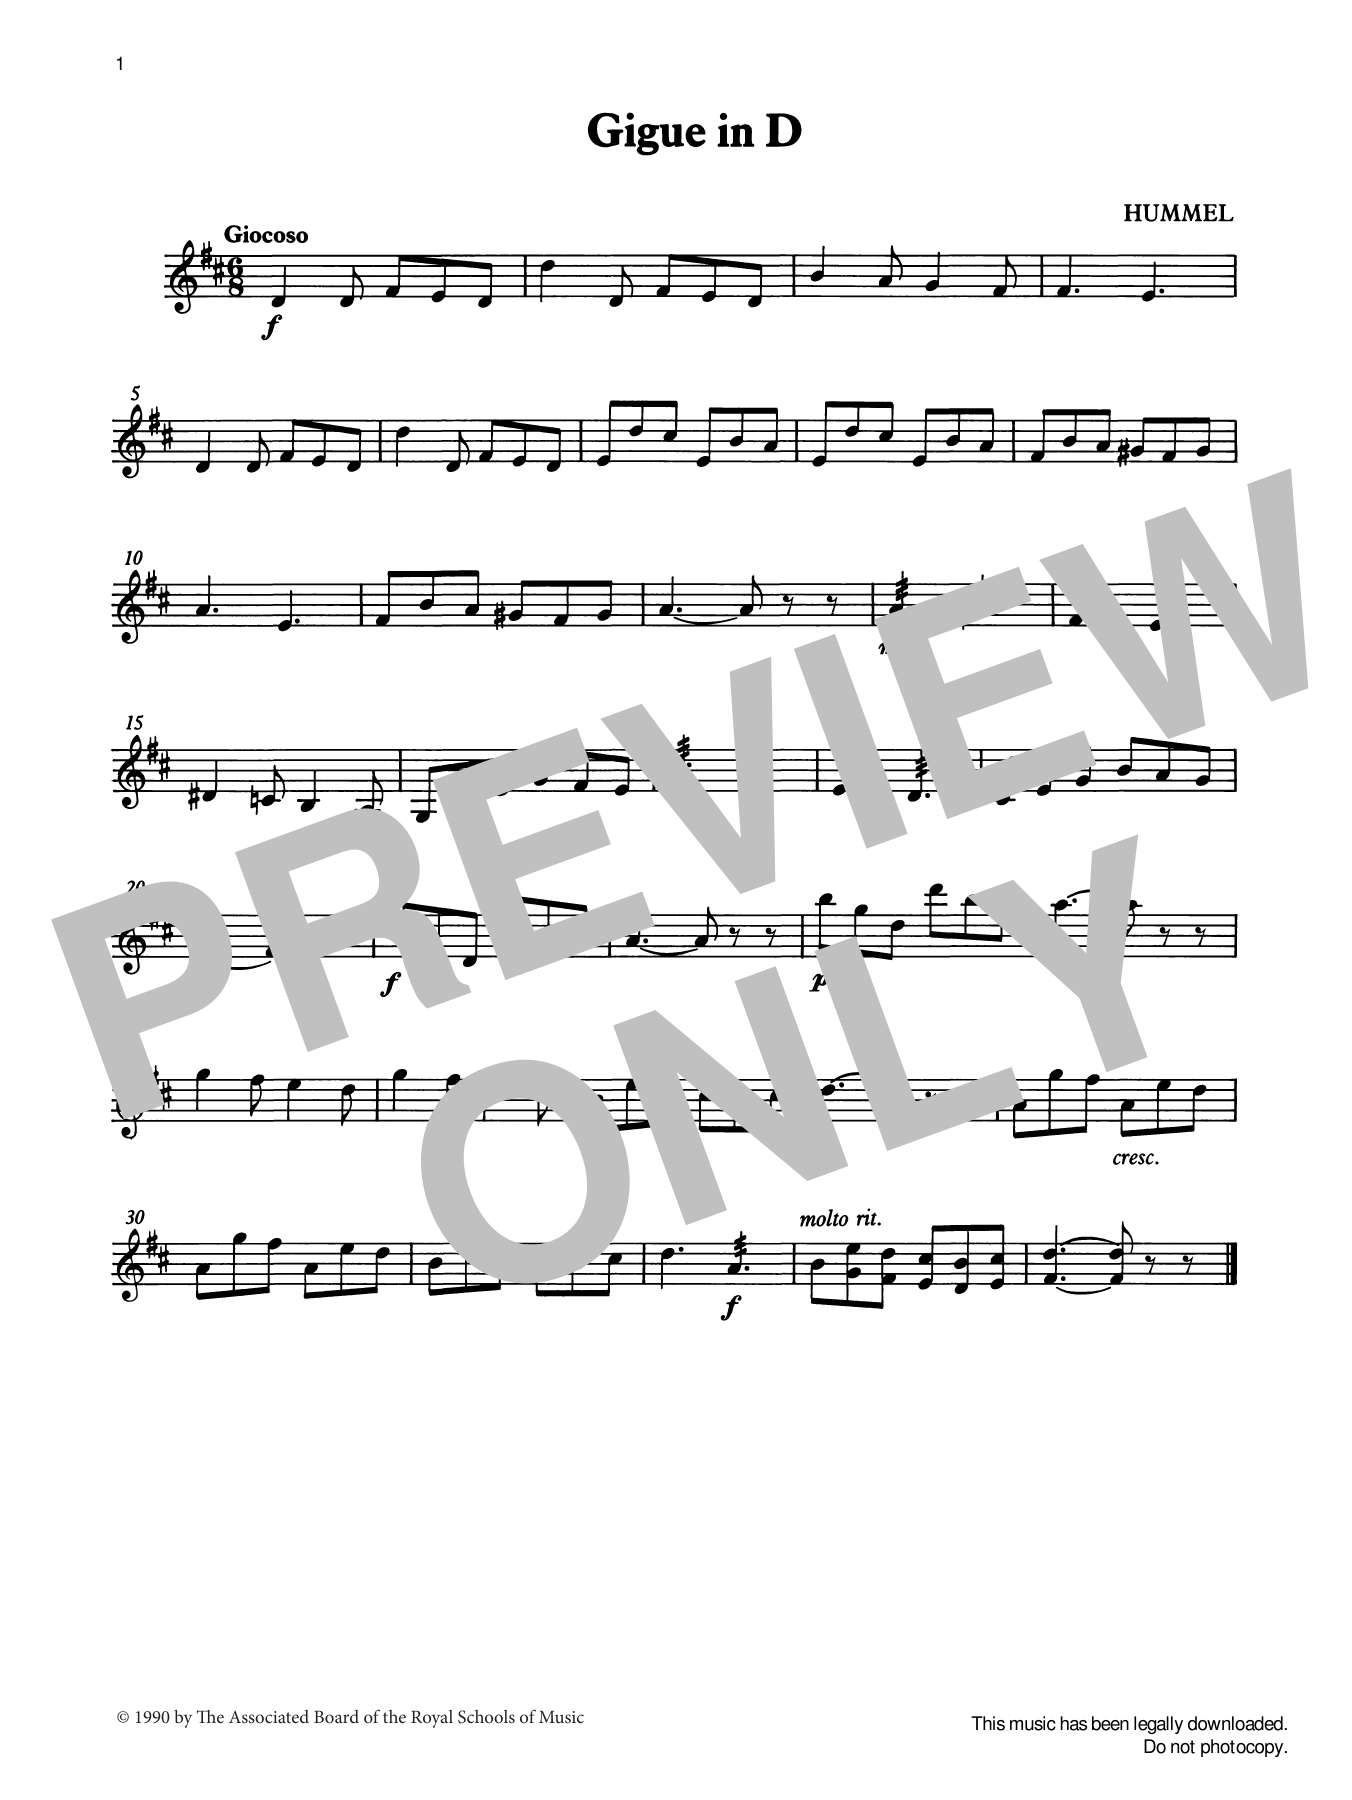 Download J. N. Hummel Gigue in D from Graded Music for Tuned Sheet Music